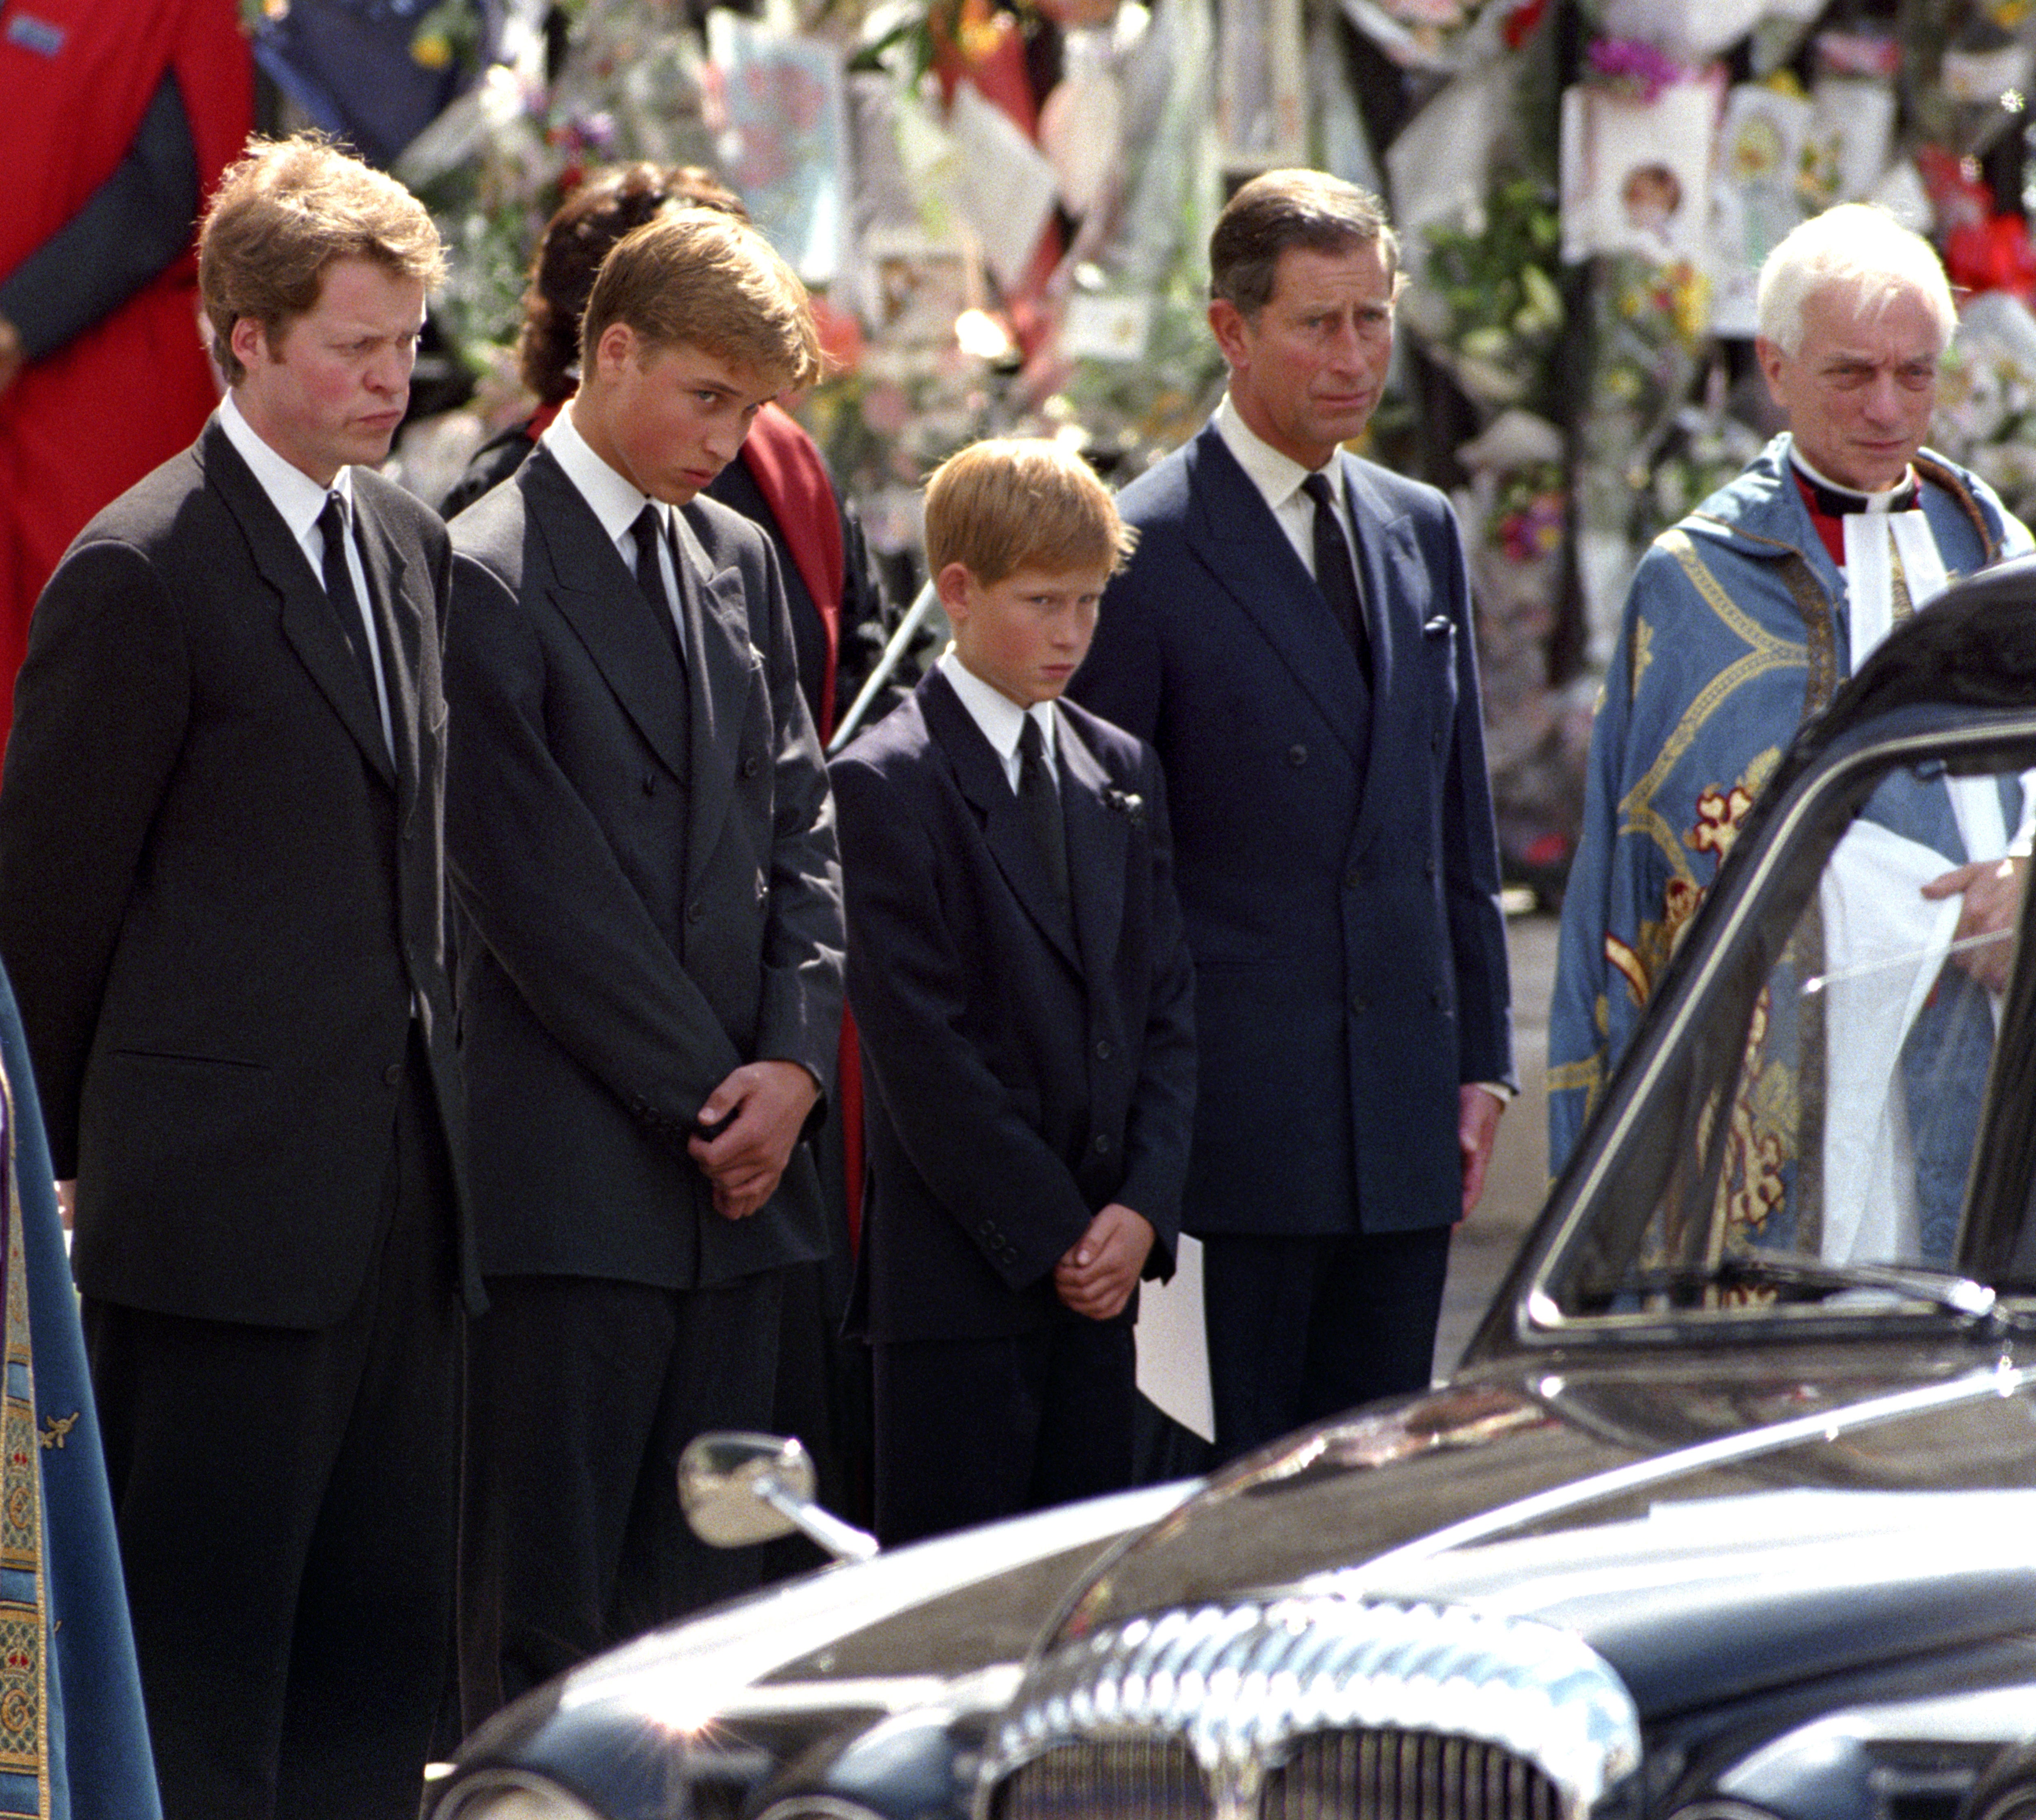 William and Harry were 15 and 12 respectively when they attended their mother’s funeral (Fiona Hanson/PA)